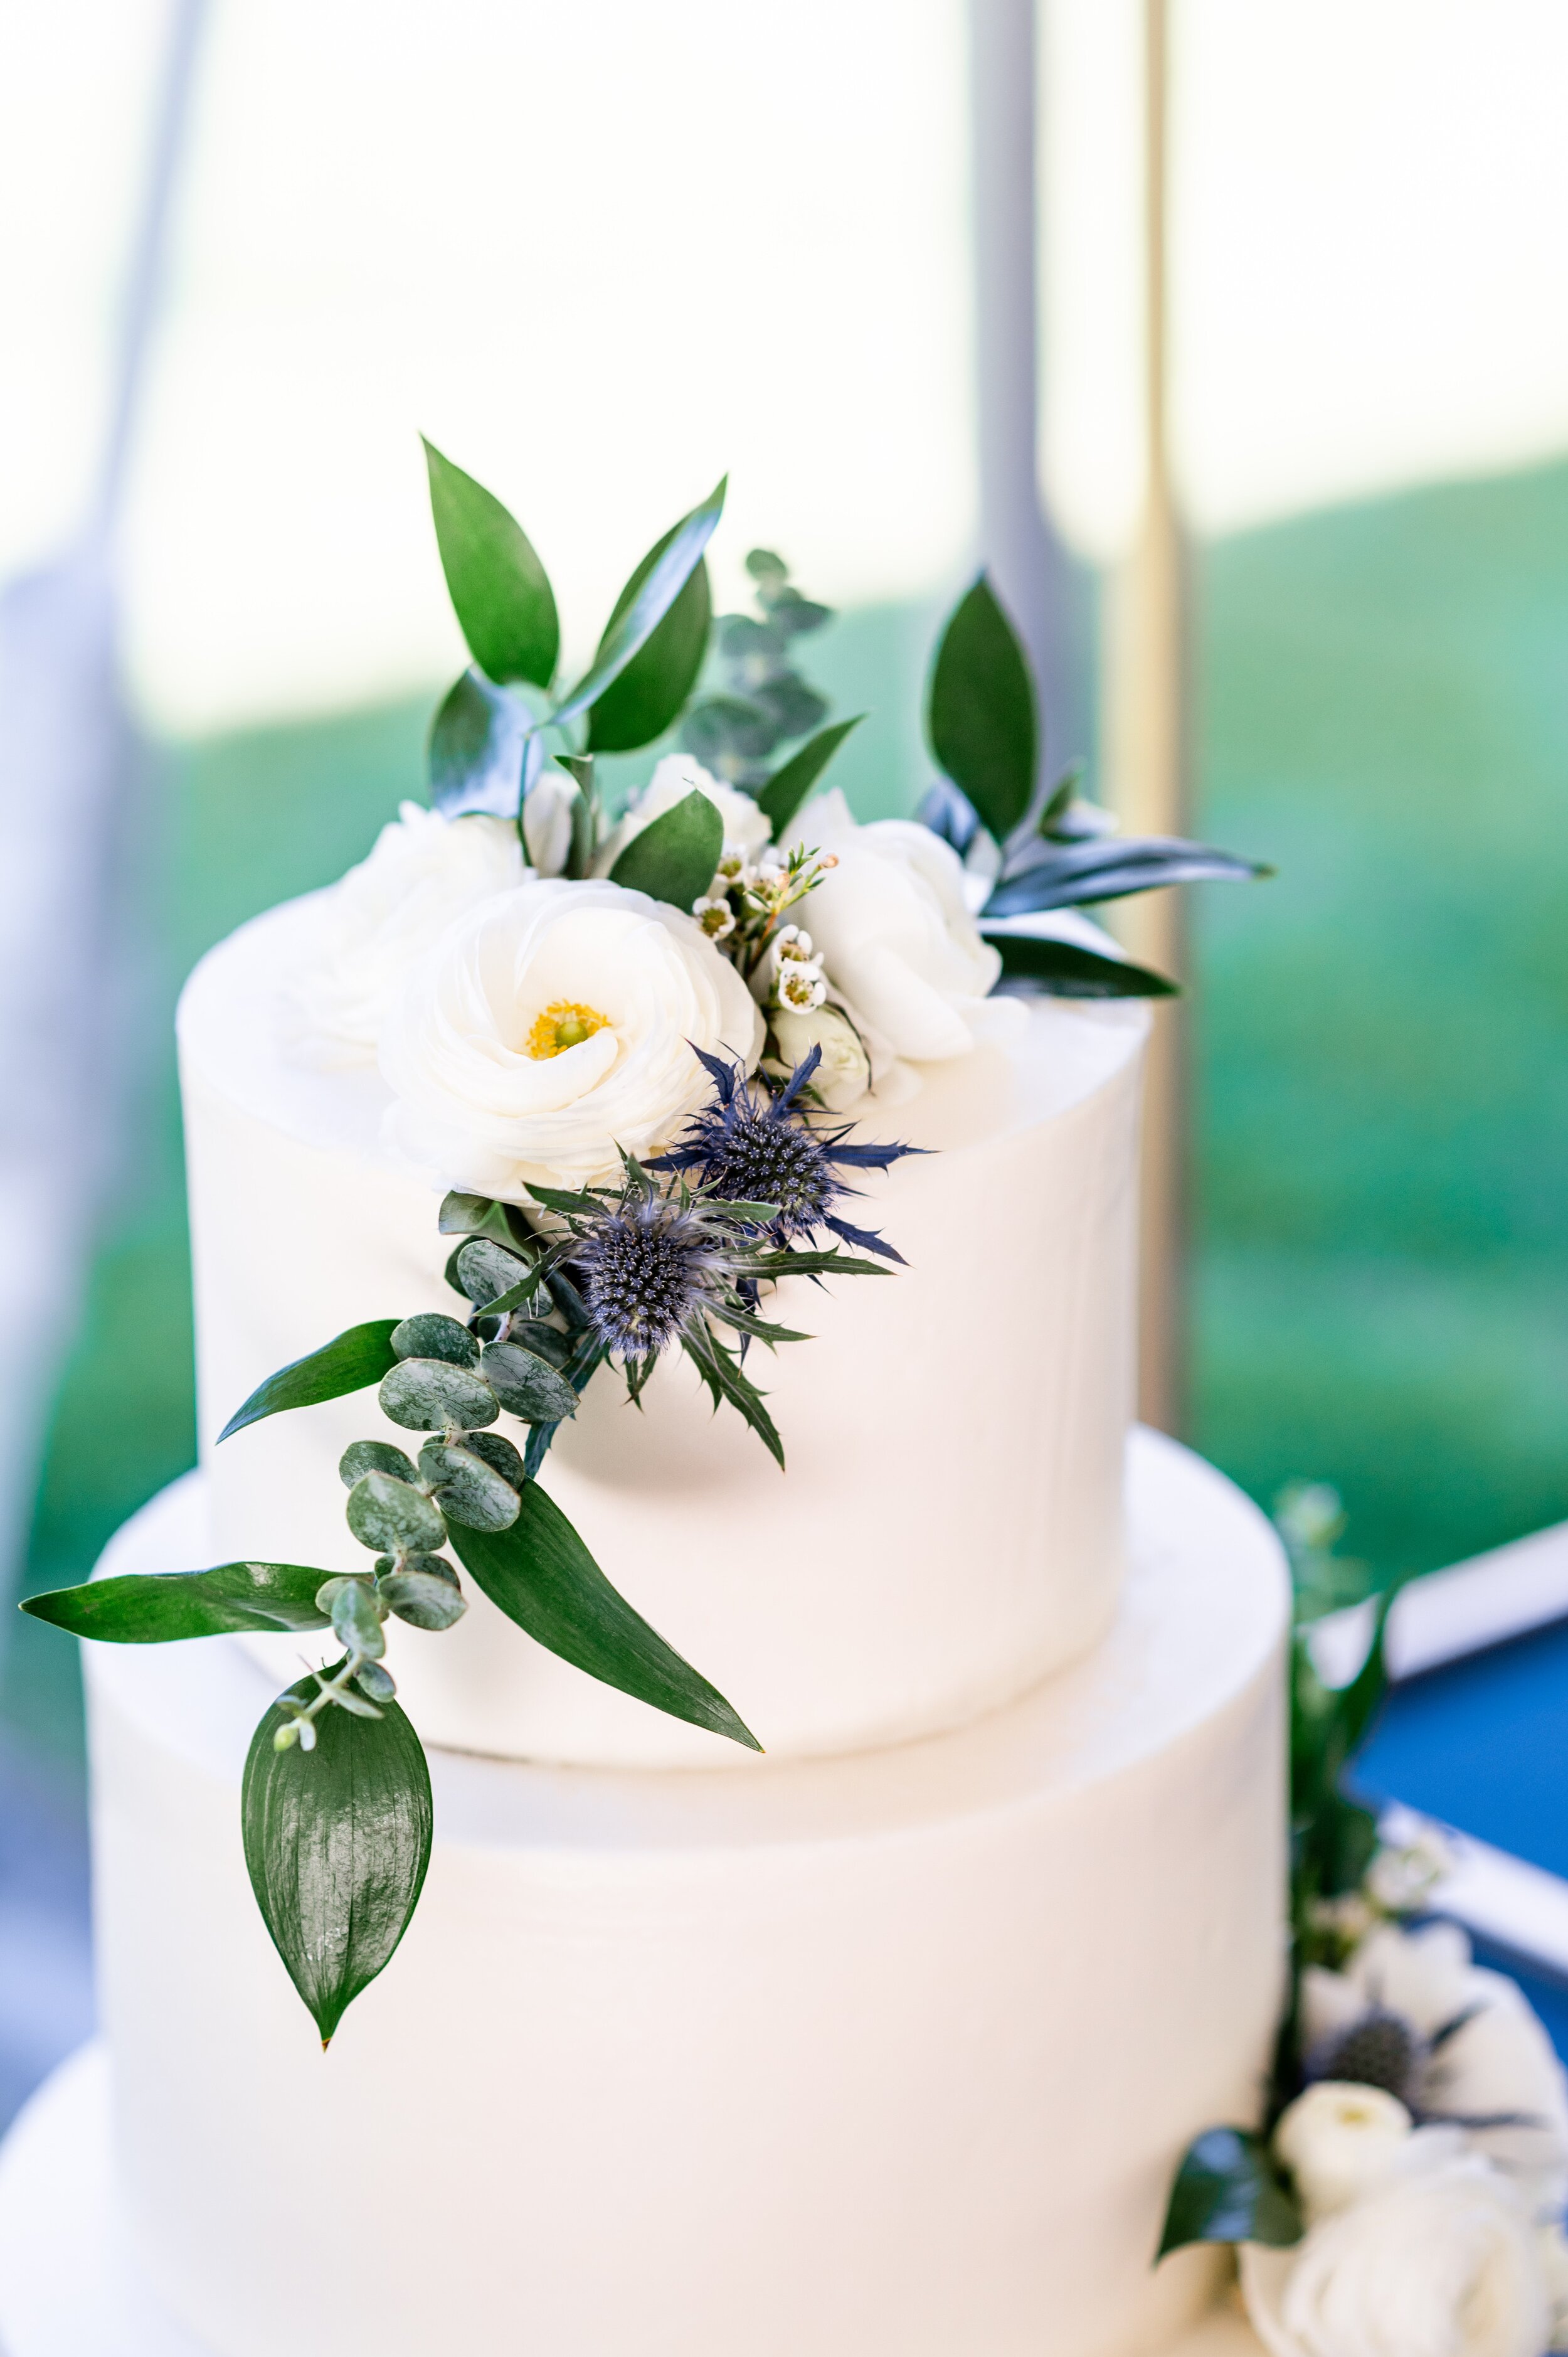 White Wedding Cake with Flowers and Gold Arbor - Harper Road Floral - Cake By Alicia - Promise Gardens Pasco Wedding Venue - Tri Cities Wedding Photographer - Morgan Tayler Photo &amp; Design